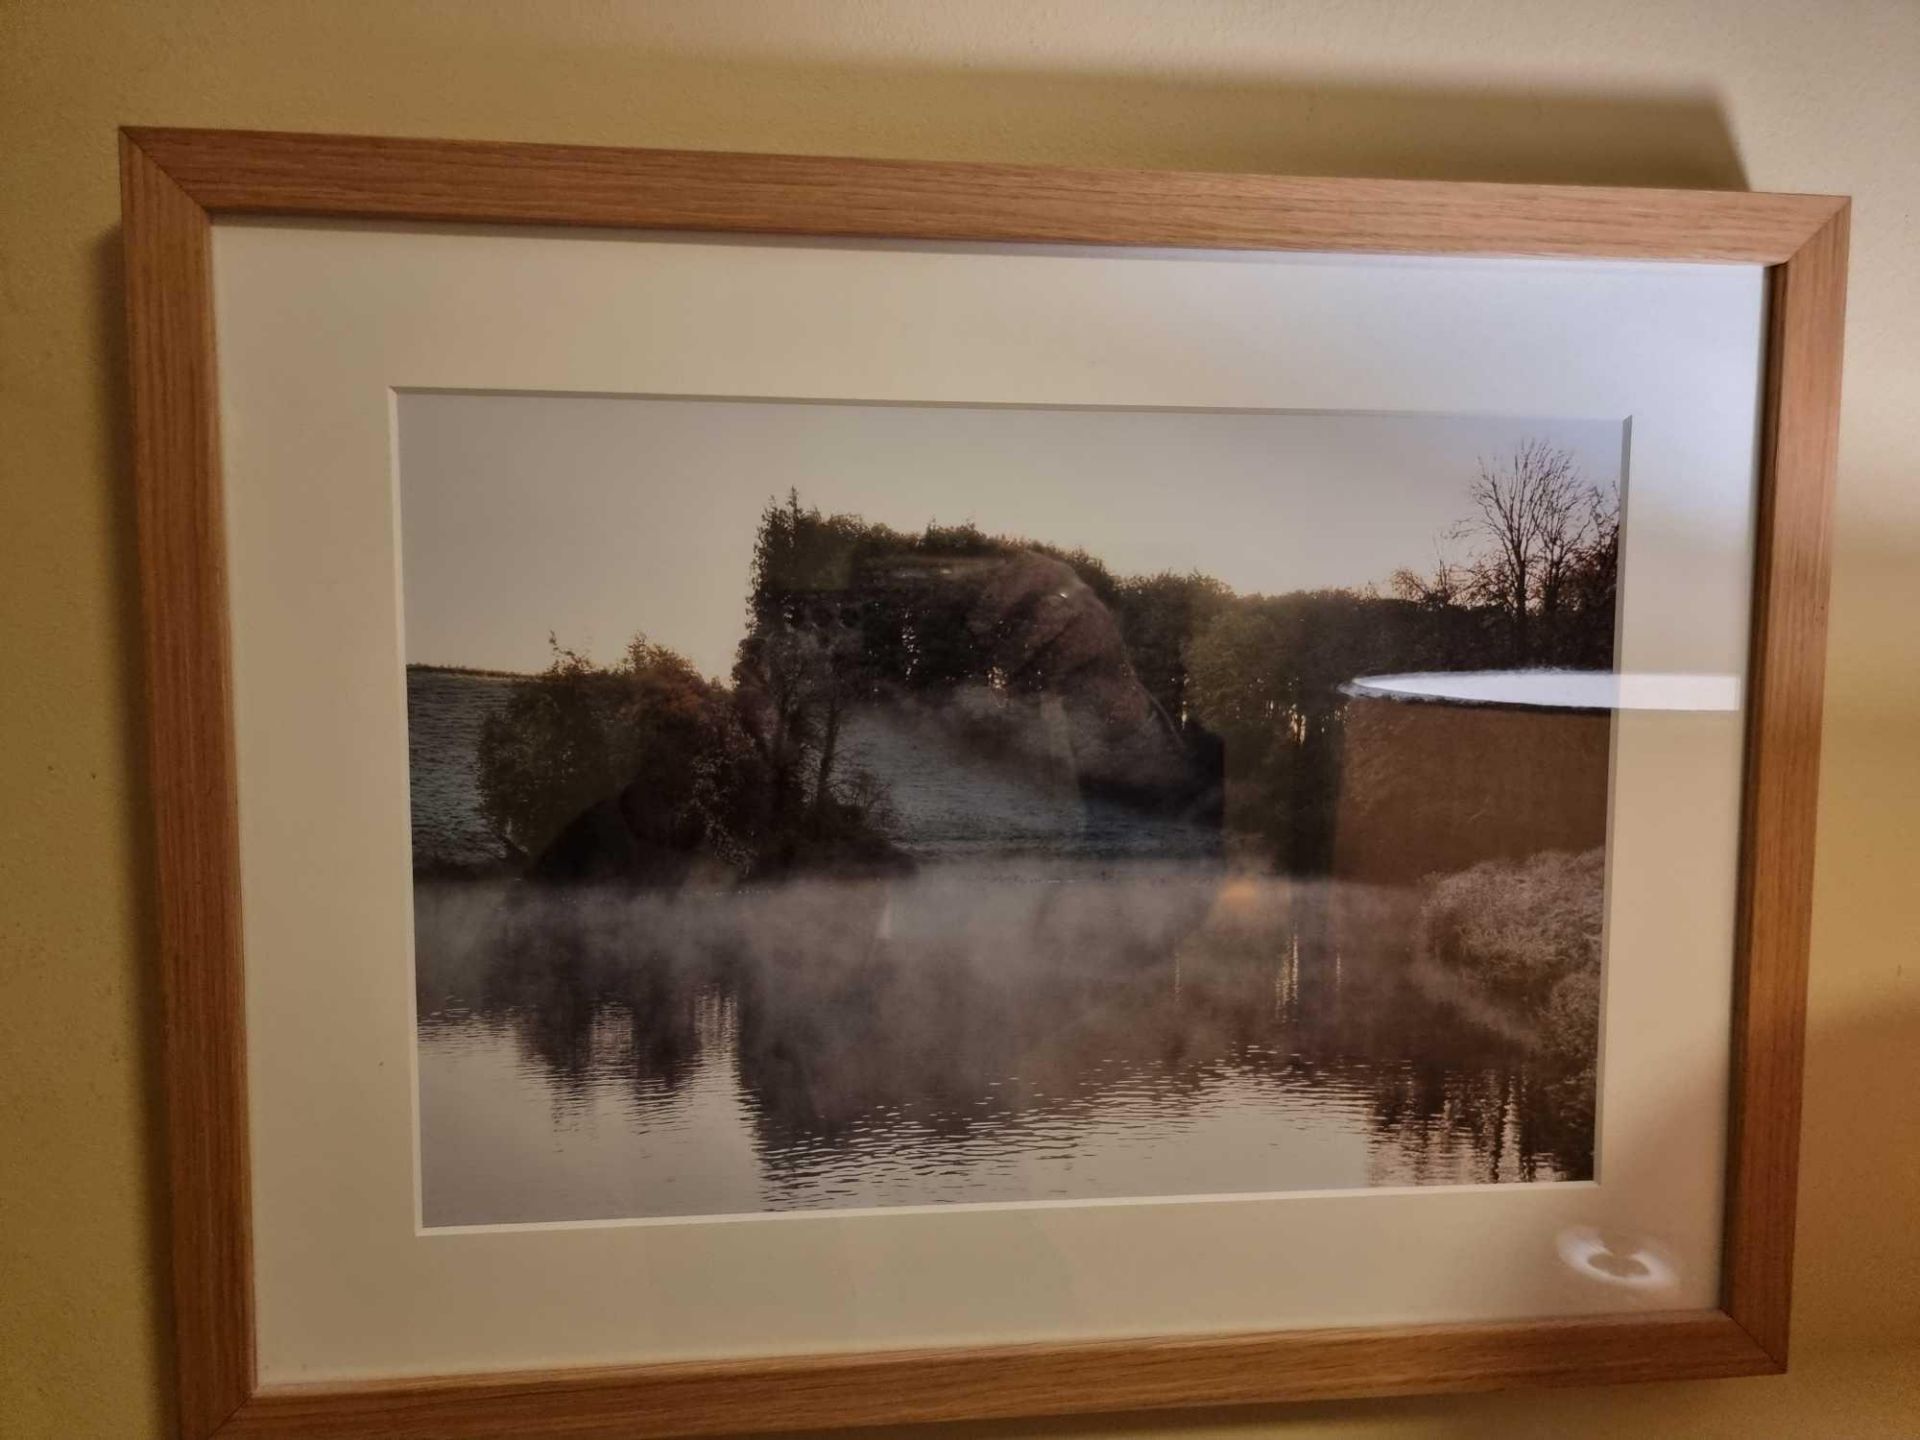 A Framed Landscape Photoprint Attributed To Colin Sturges Okewood Imagery In Modern Wood Frame 51